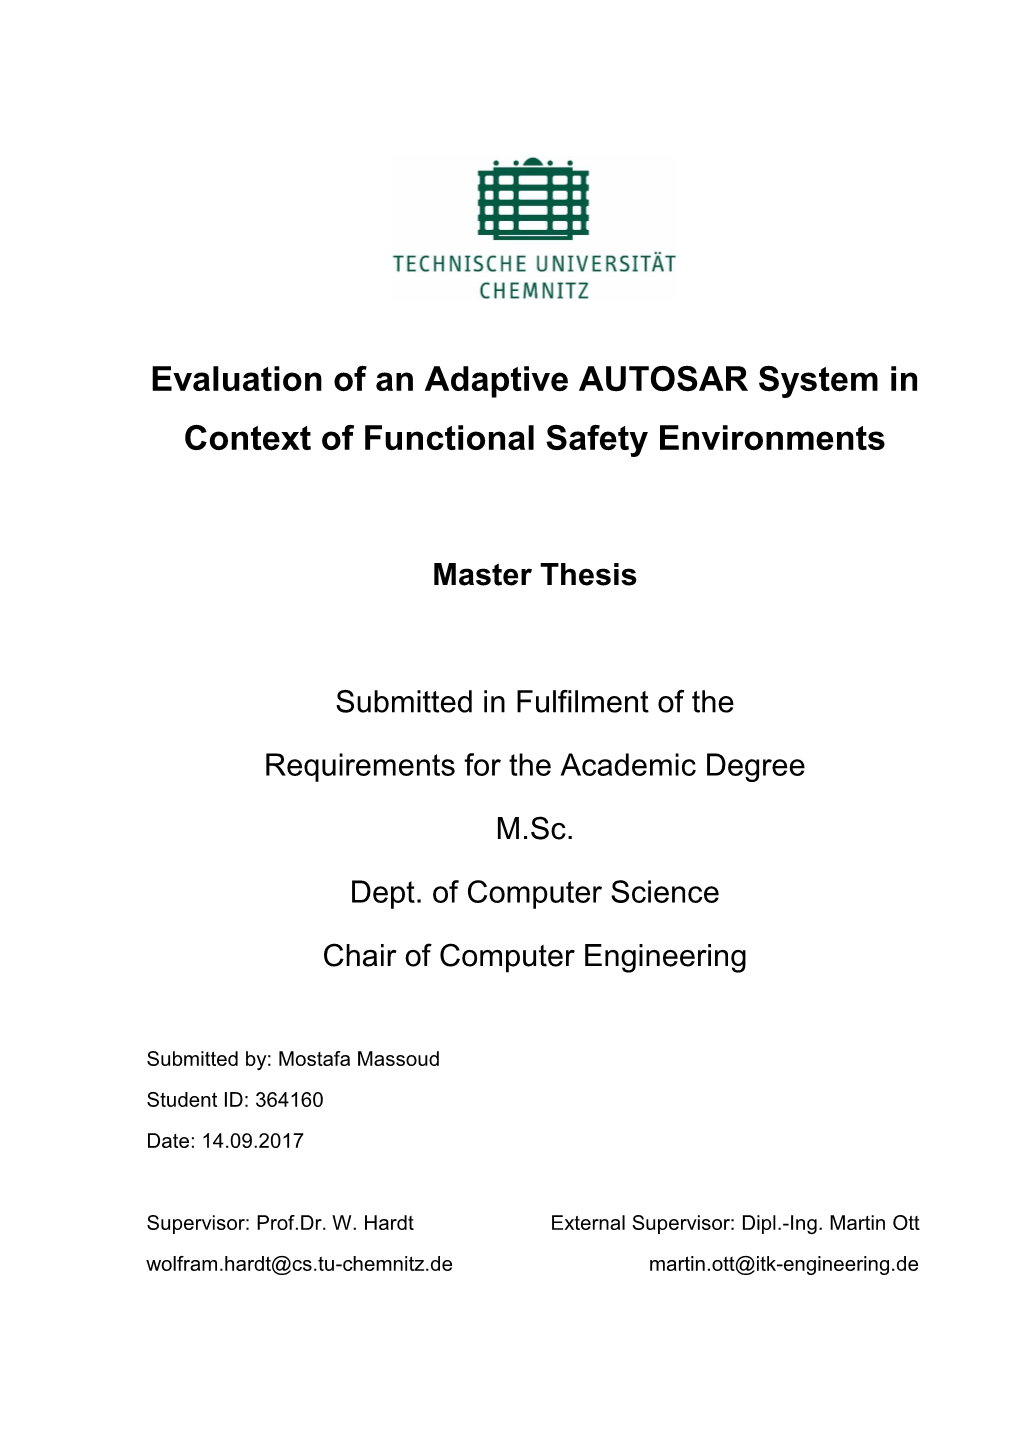 Evaluation of an Adaptive AUTOSAR System in Context of Functional Safety Environments